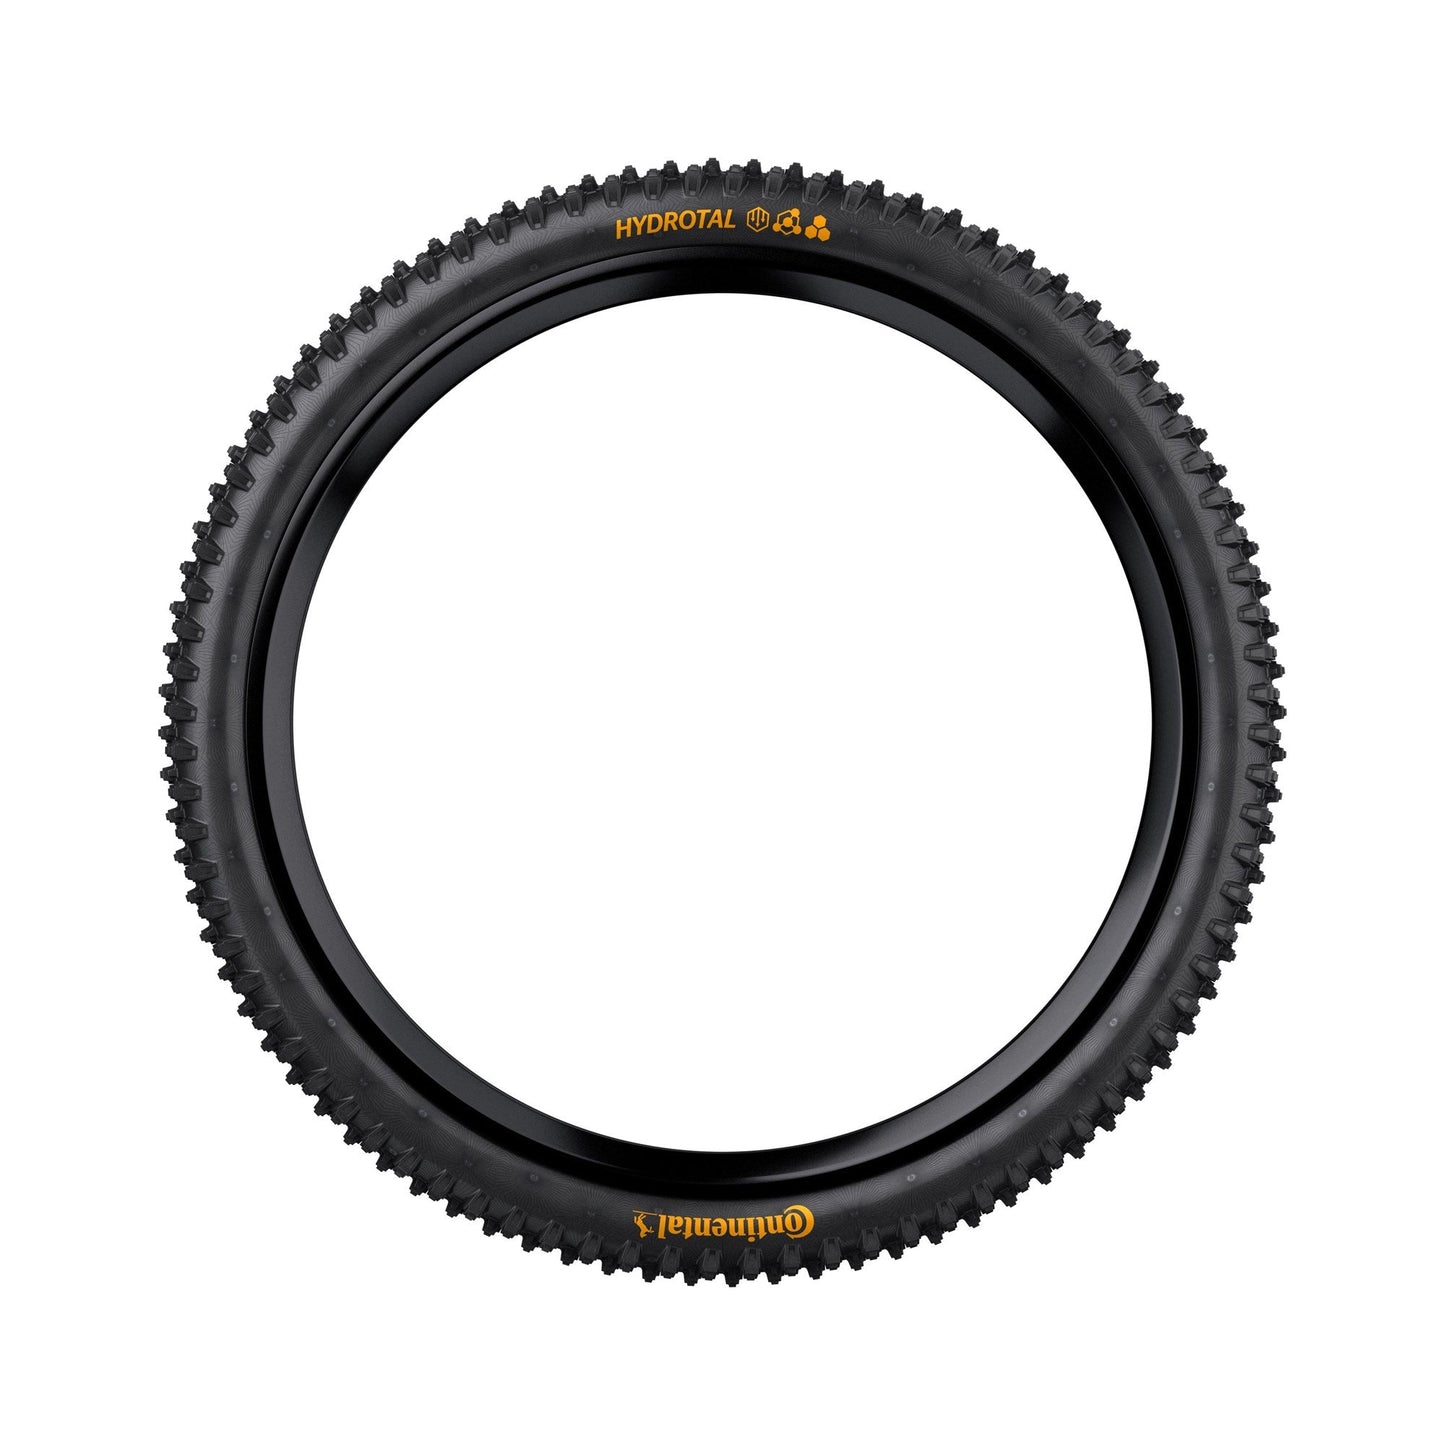 CONTINENTAL HYDROTAL DOWNHILL 27.5X2.40 SUPERSOFT FOLDING TYRE